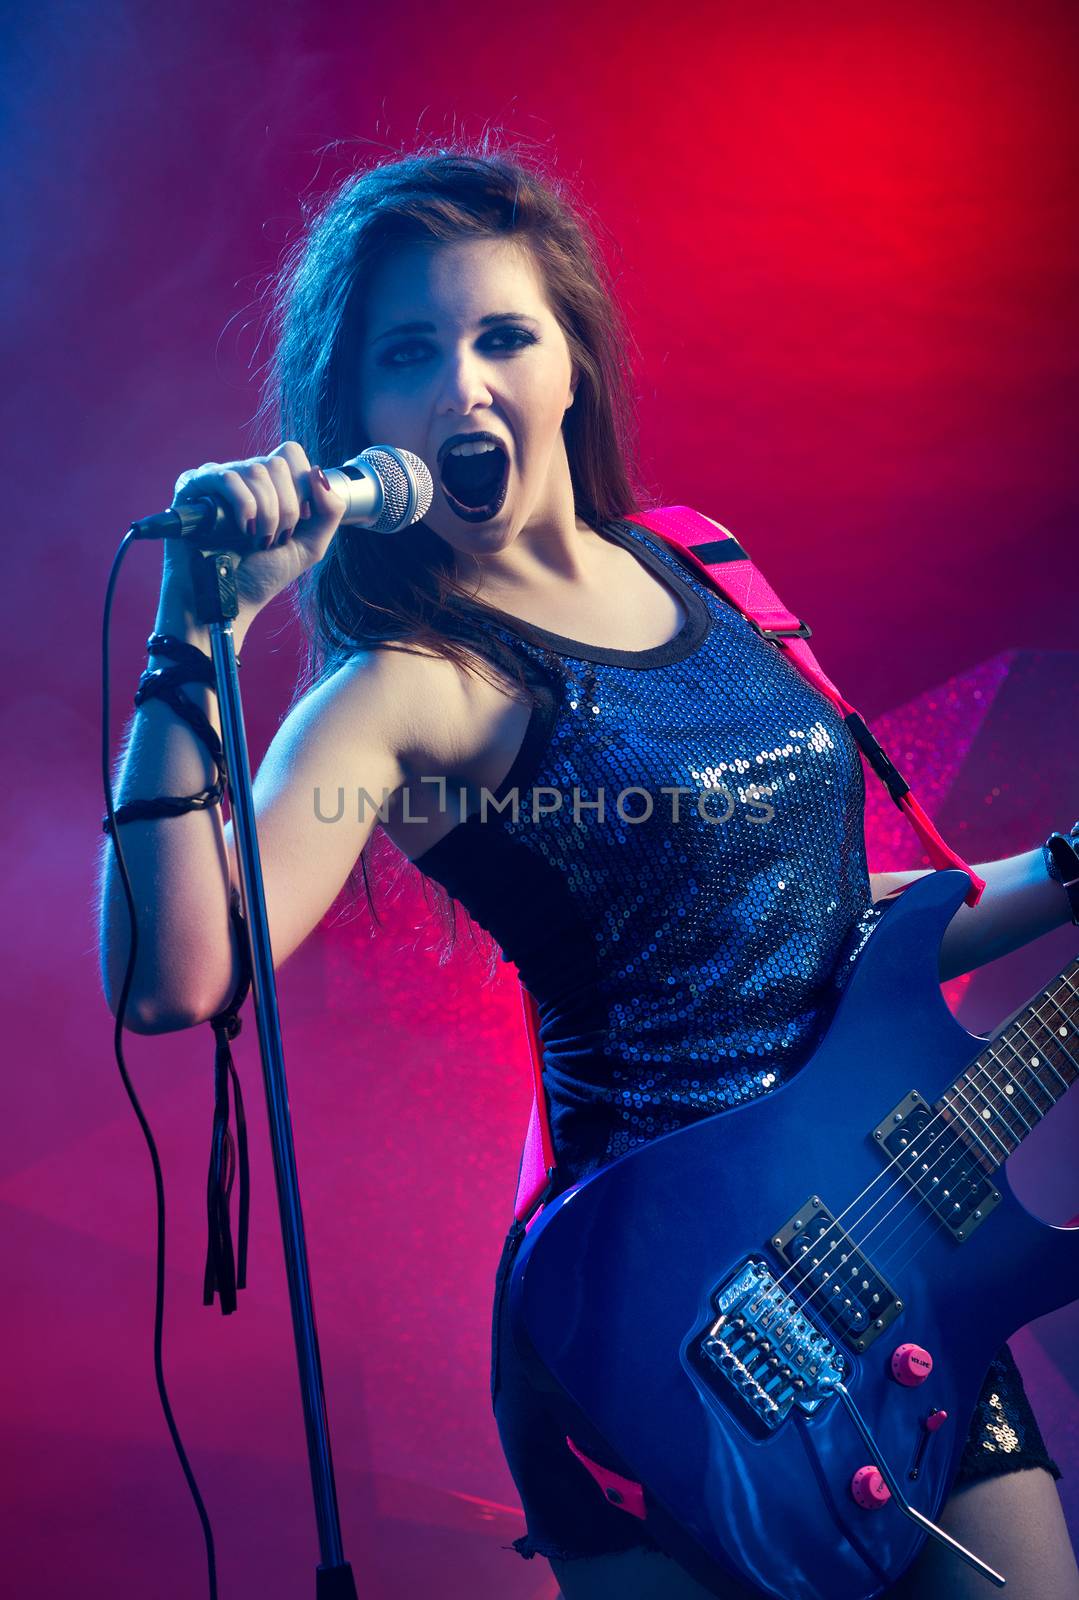 Young teenager rock star singing and playing electric guitar on stage.